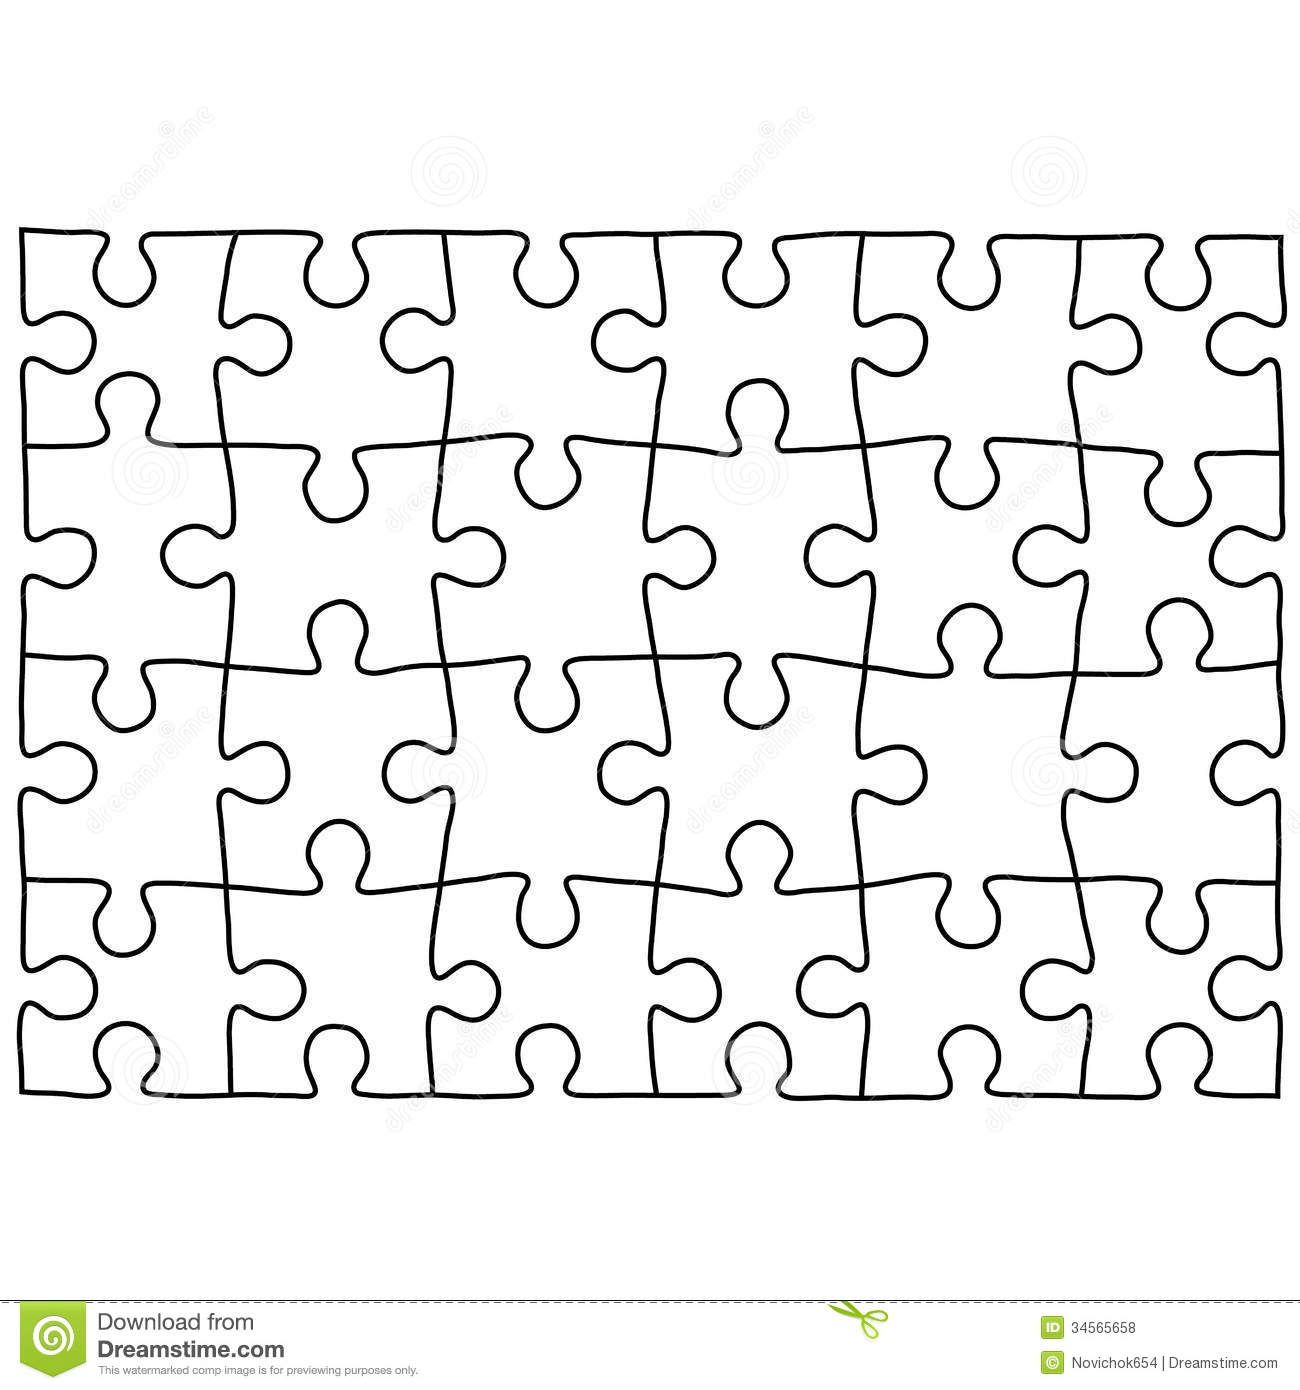 030 Puzzle Pieces Template For Word Best Of Piece Intended Within Jigsaw Puzzle Template For Word